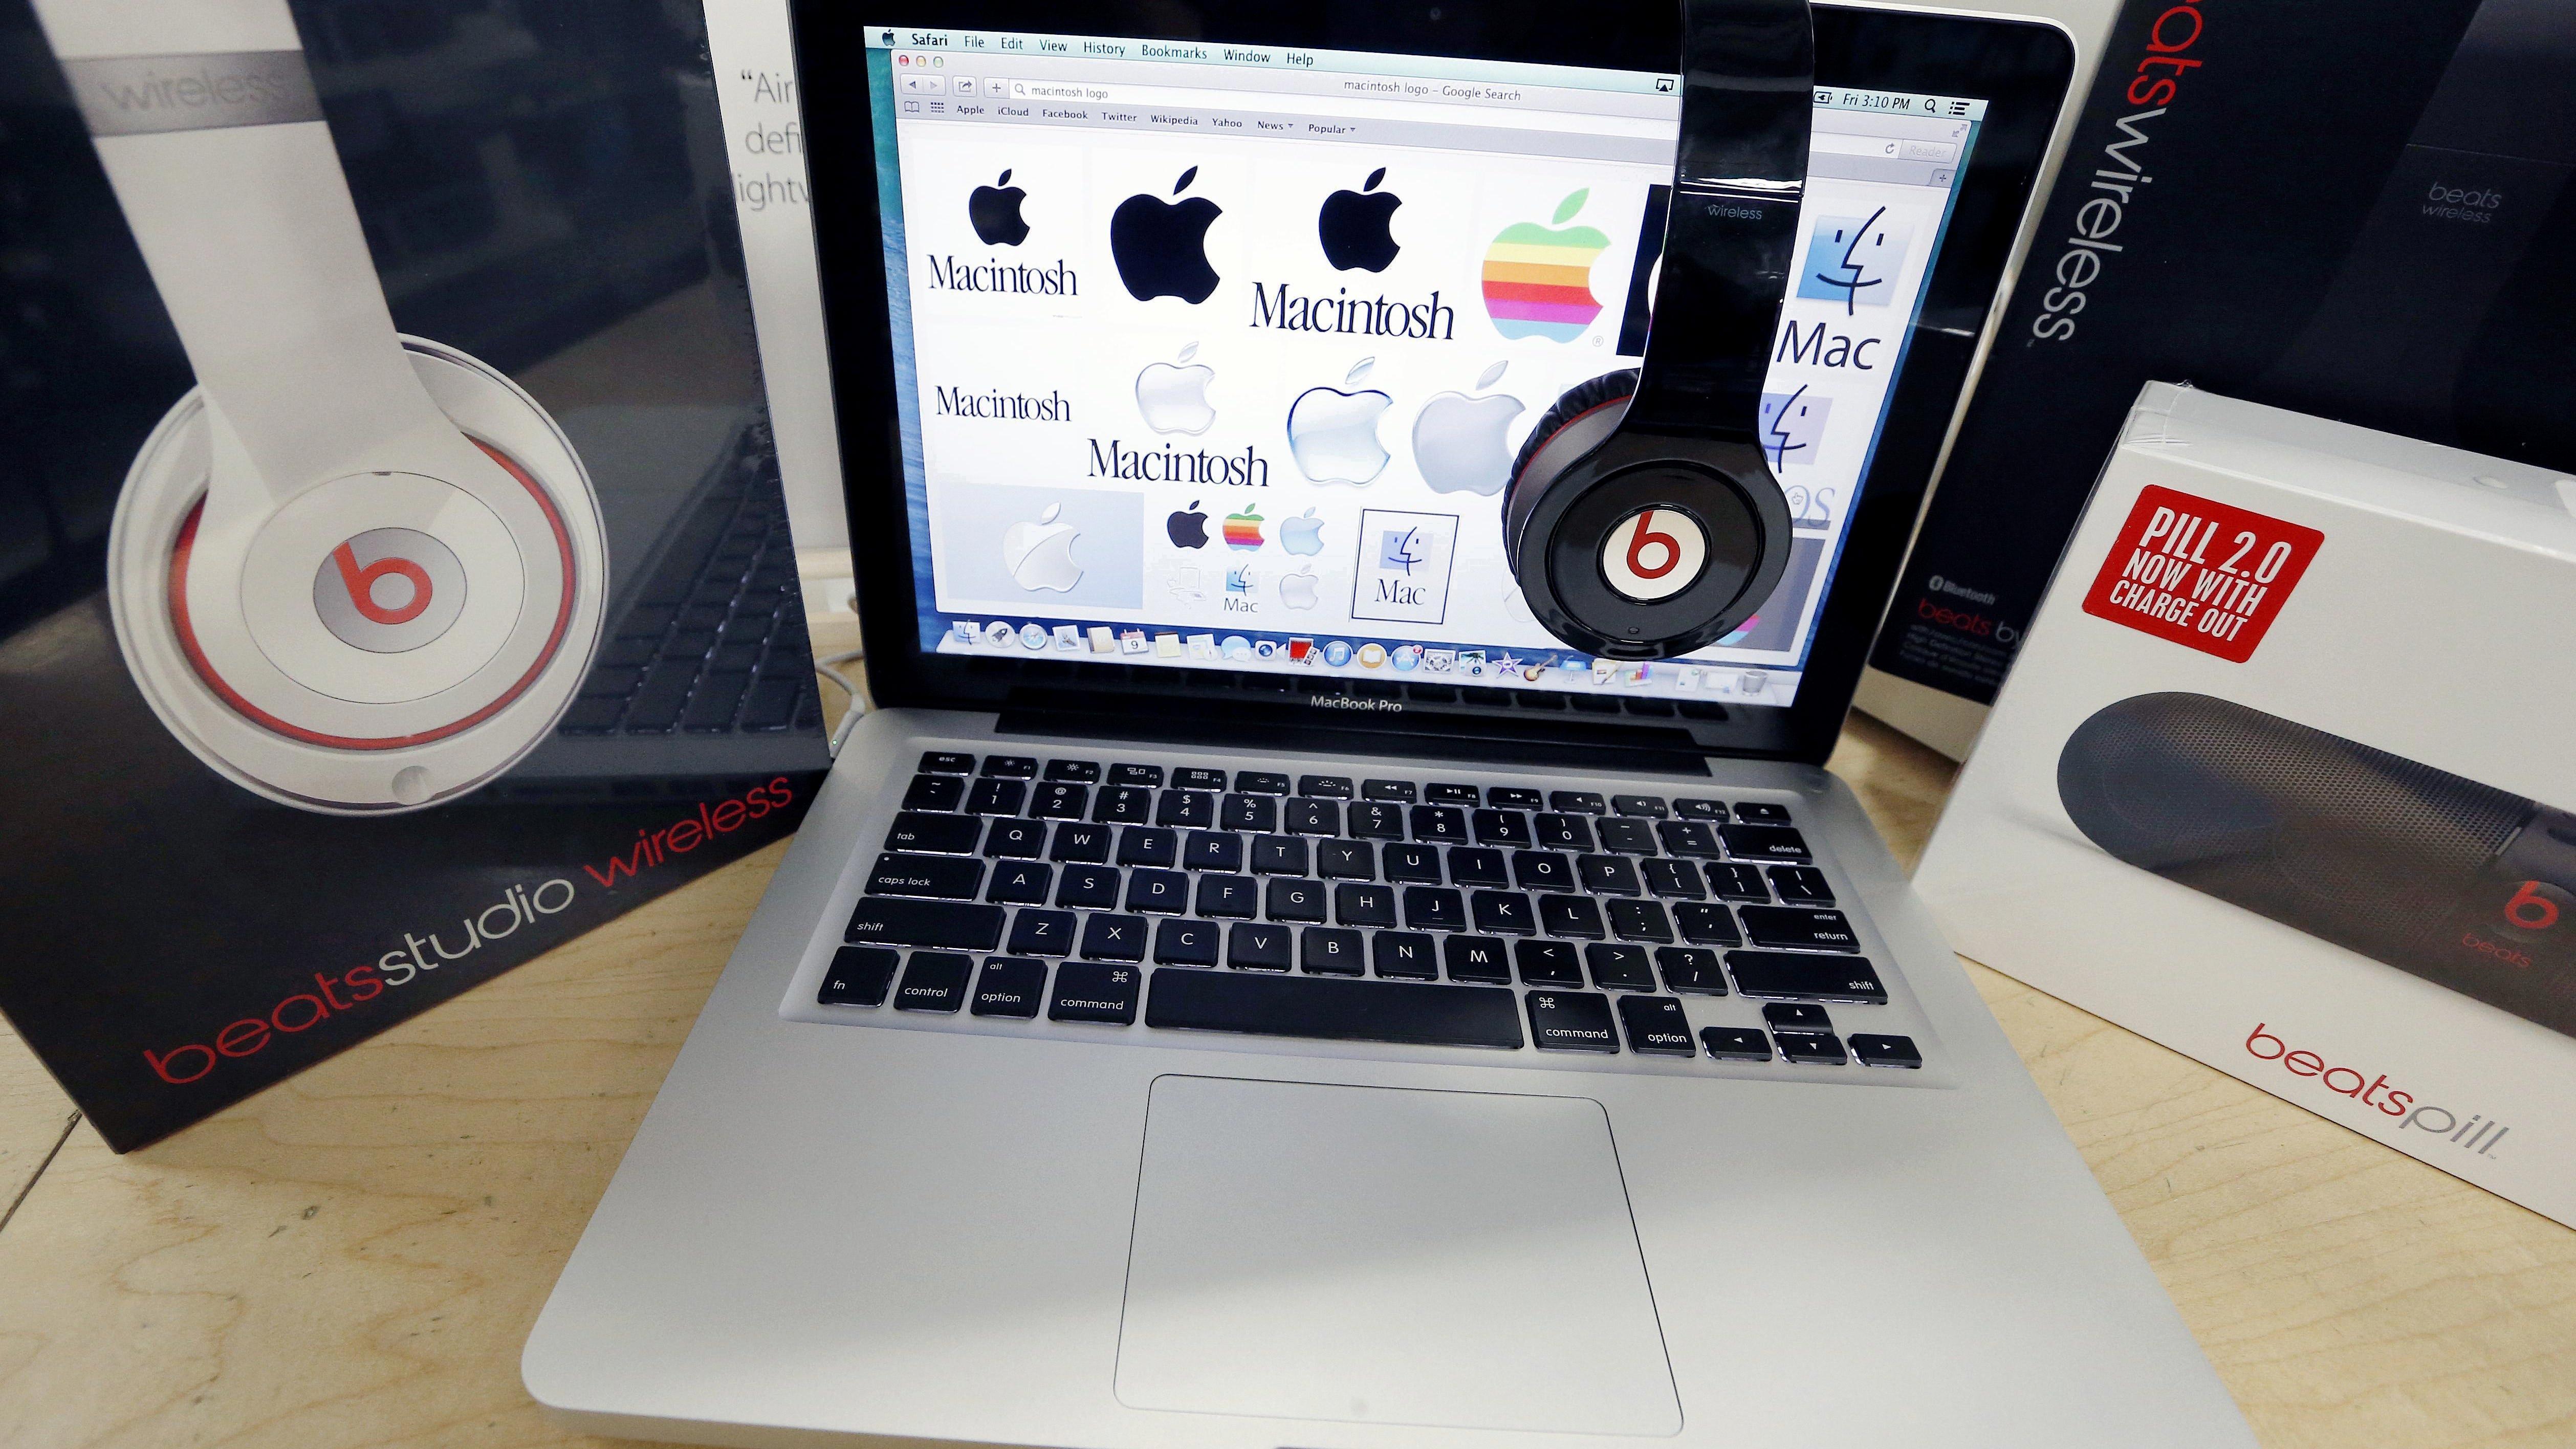 Are Macbooks still coming with Beats? 9